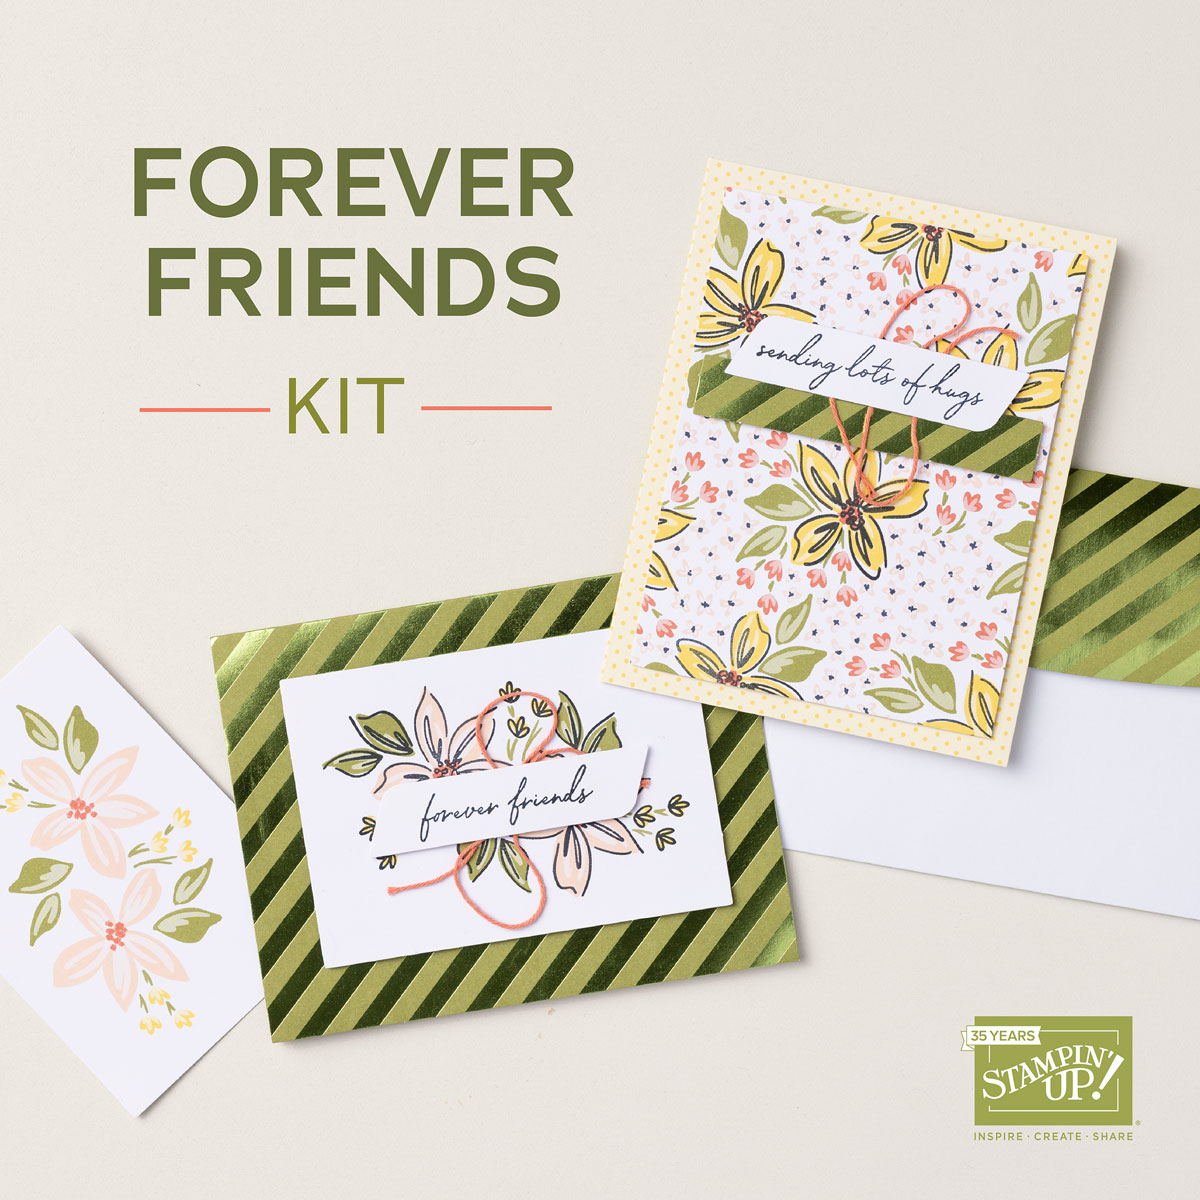 Forever Friends Kit - Kits Collection | Join Stampin’ Up! | Frequently Asked Questions about becoming a Stampin’ Up! Demonstrator | Join the Craft Stampin’ Crew | Stampin Up Demonstrator Linda Cullen | Crafty Stampin’ | Purchase Stampin’ Up! Product | FAQ about Paper Pumpkin | FAQ about Kits Collection | Online Exclusive Products